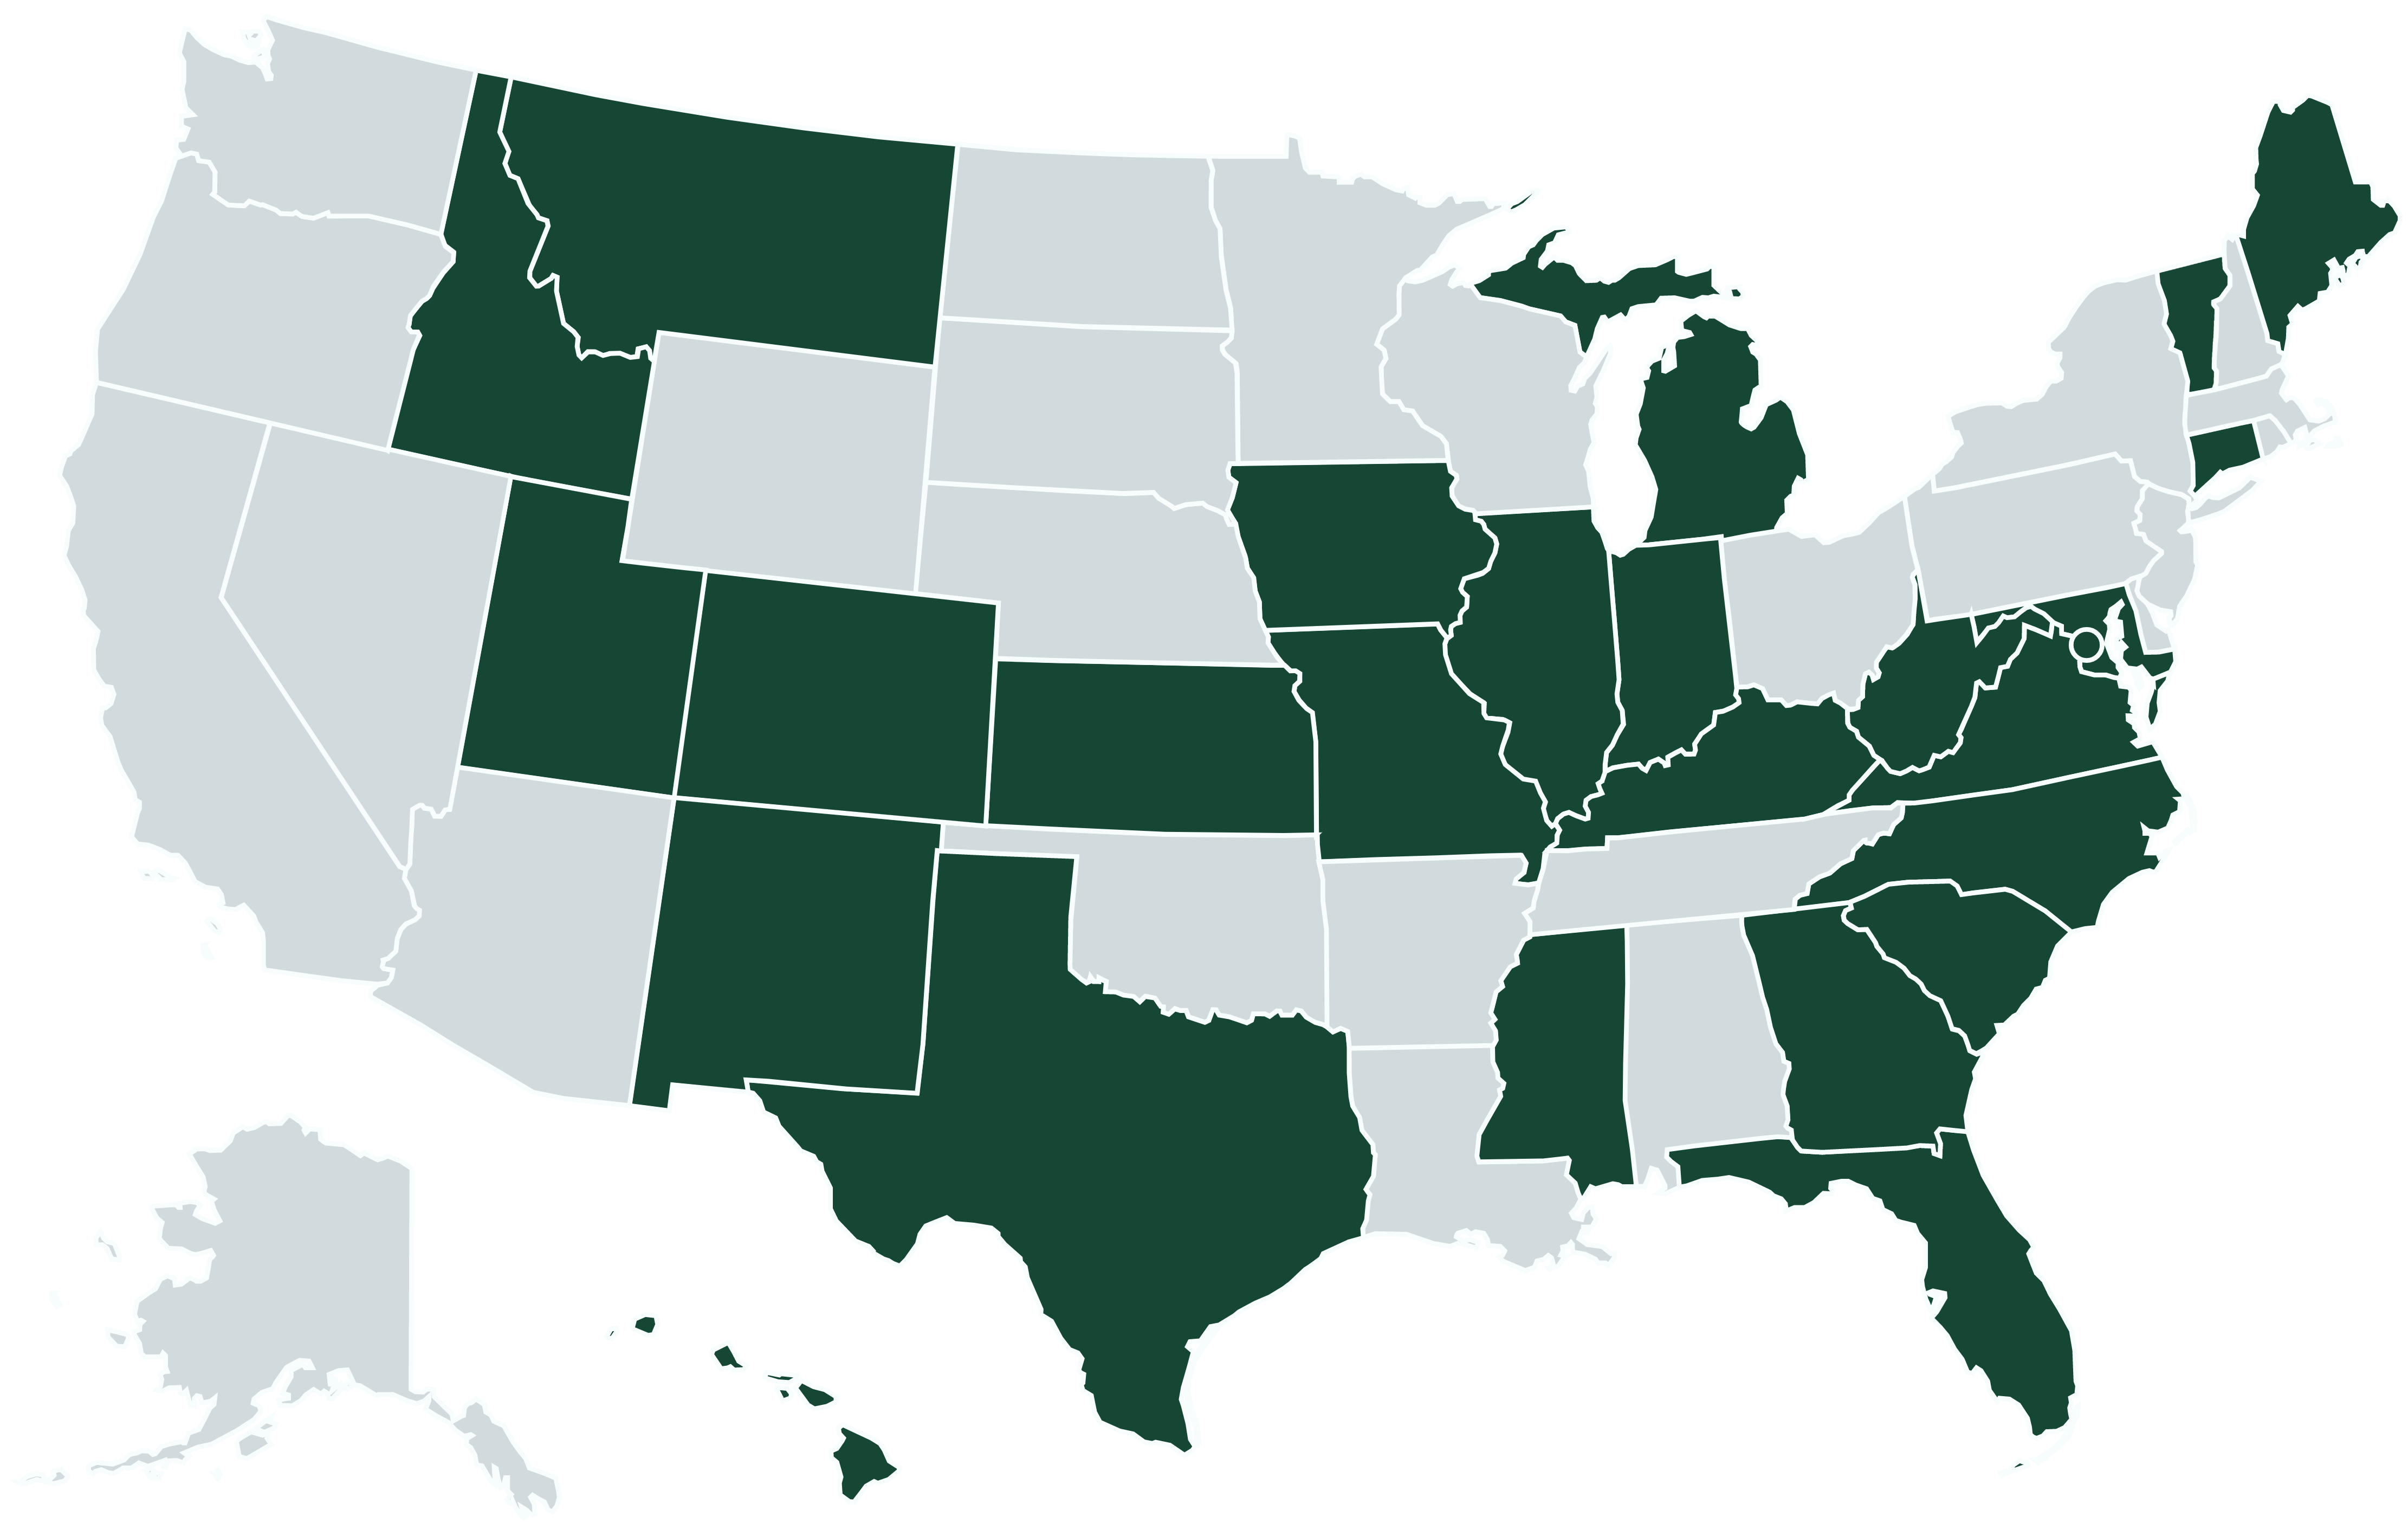 United States map with authorized states filled in green